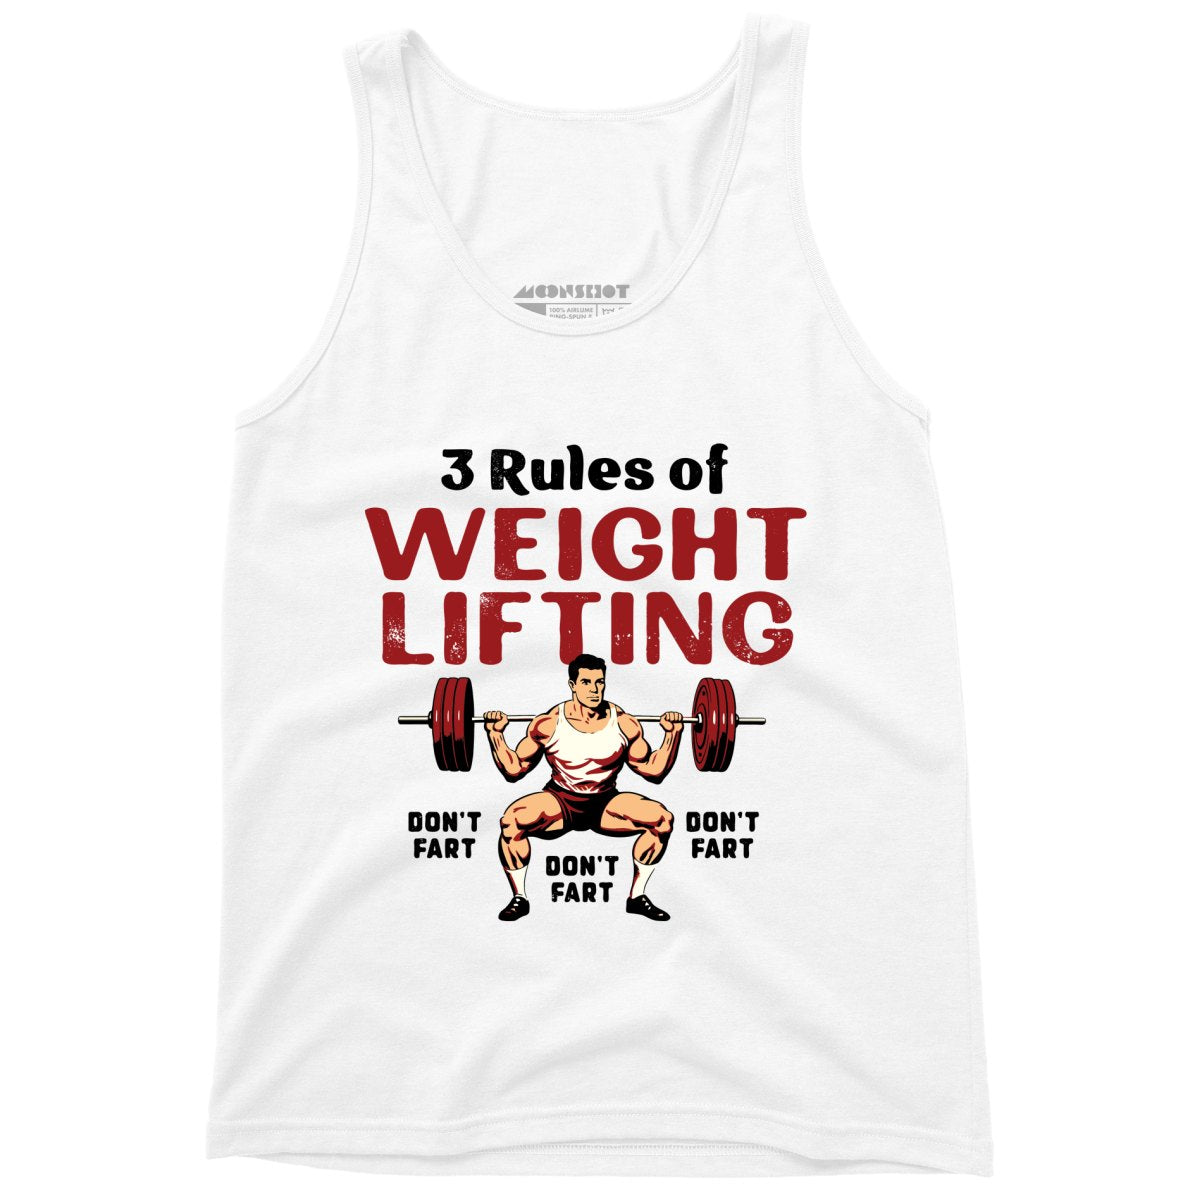 3 Rules of Weightlifting - Unisex Tank Top